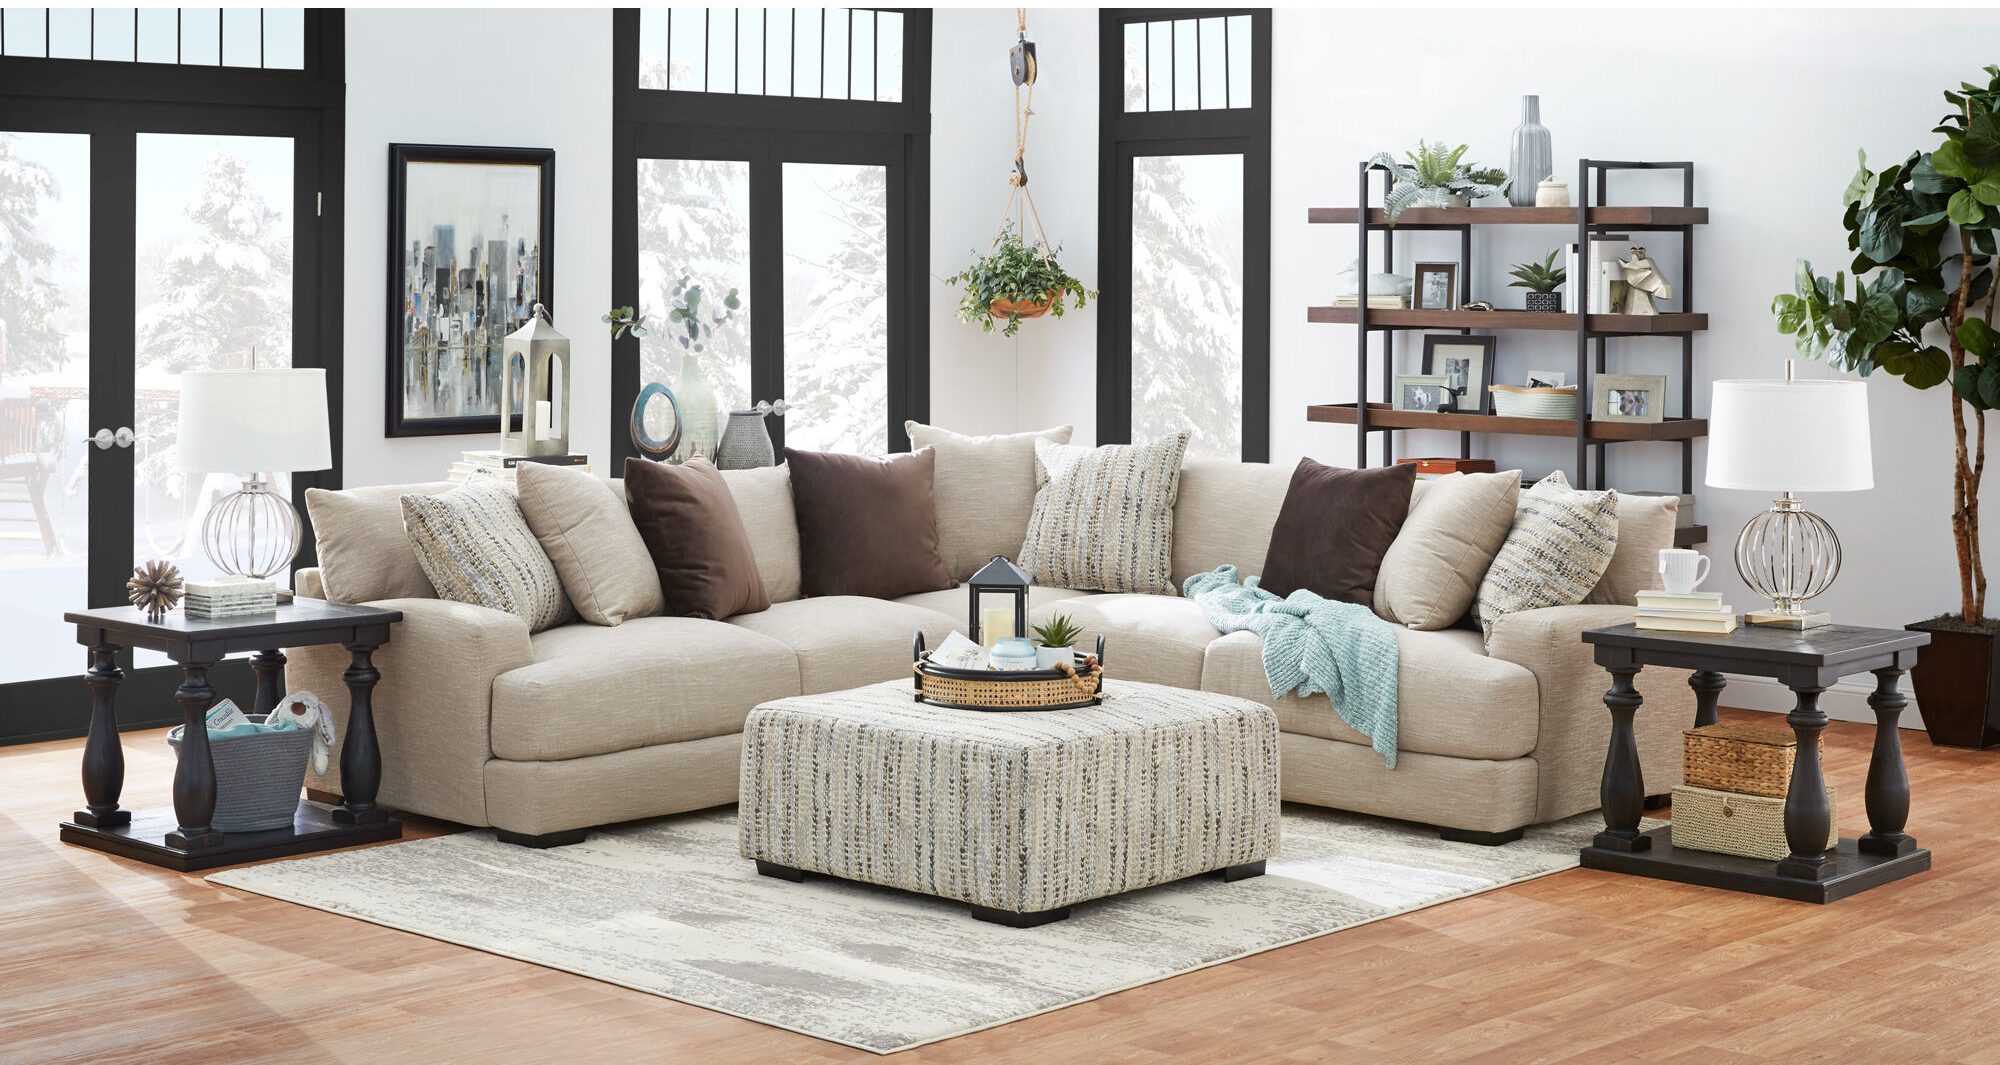 27+ Online Stores Like Wayfair for Stylish Furniture & Decor in 2023